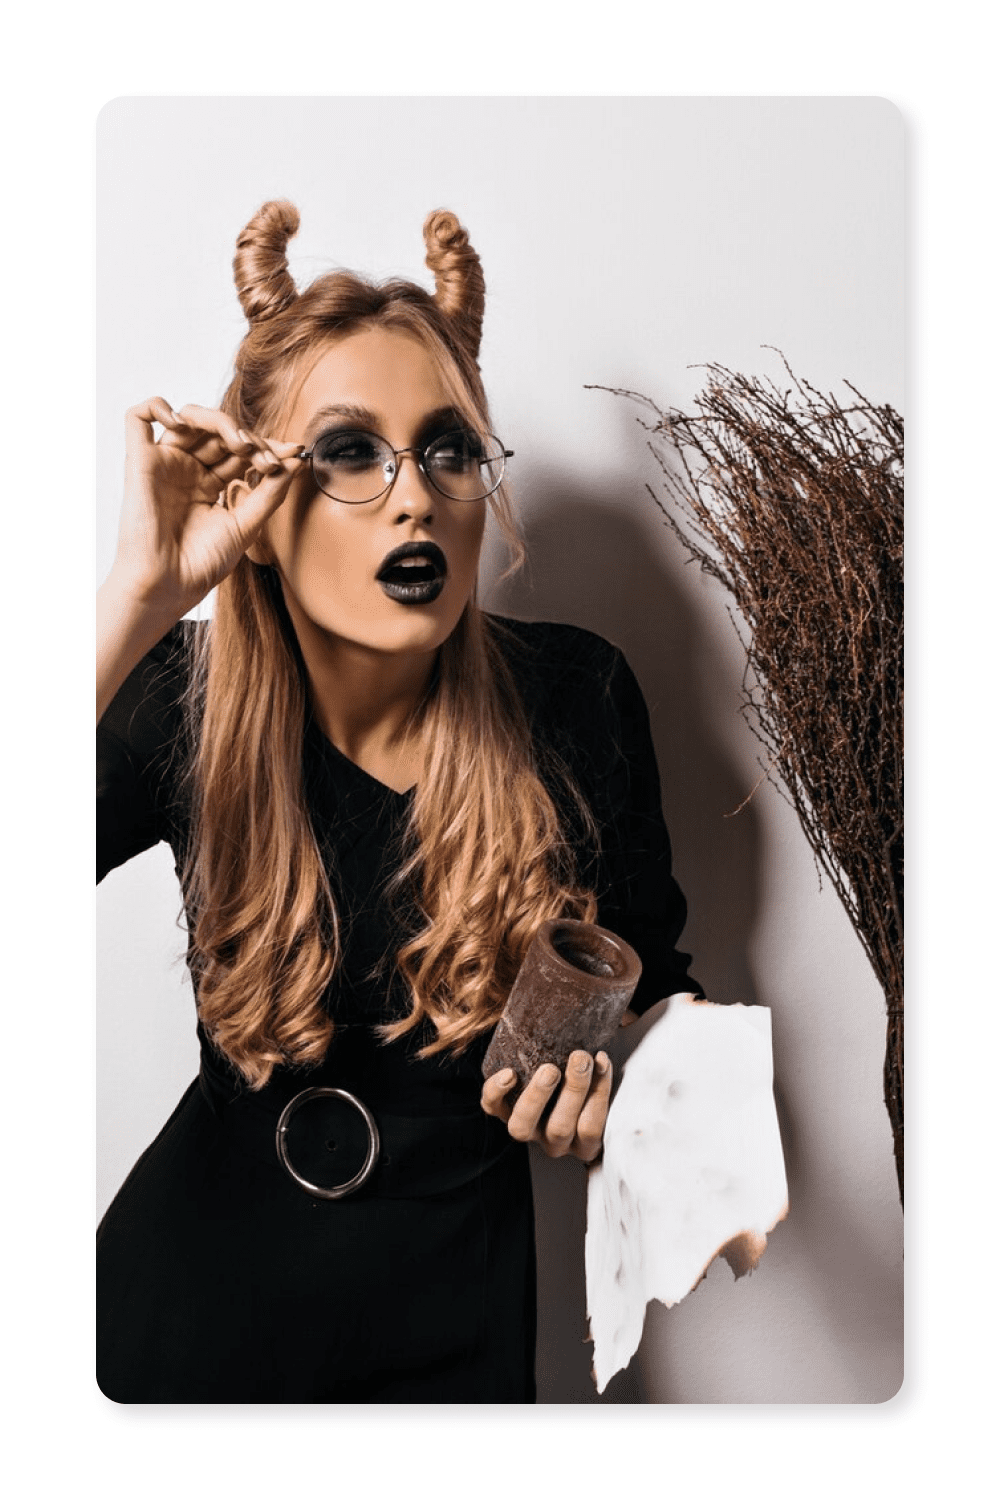 Photo of a girl in a black dress, glasses and horns from her hair.